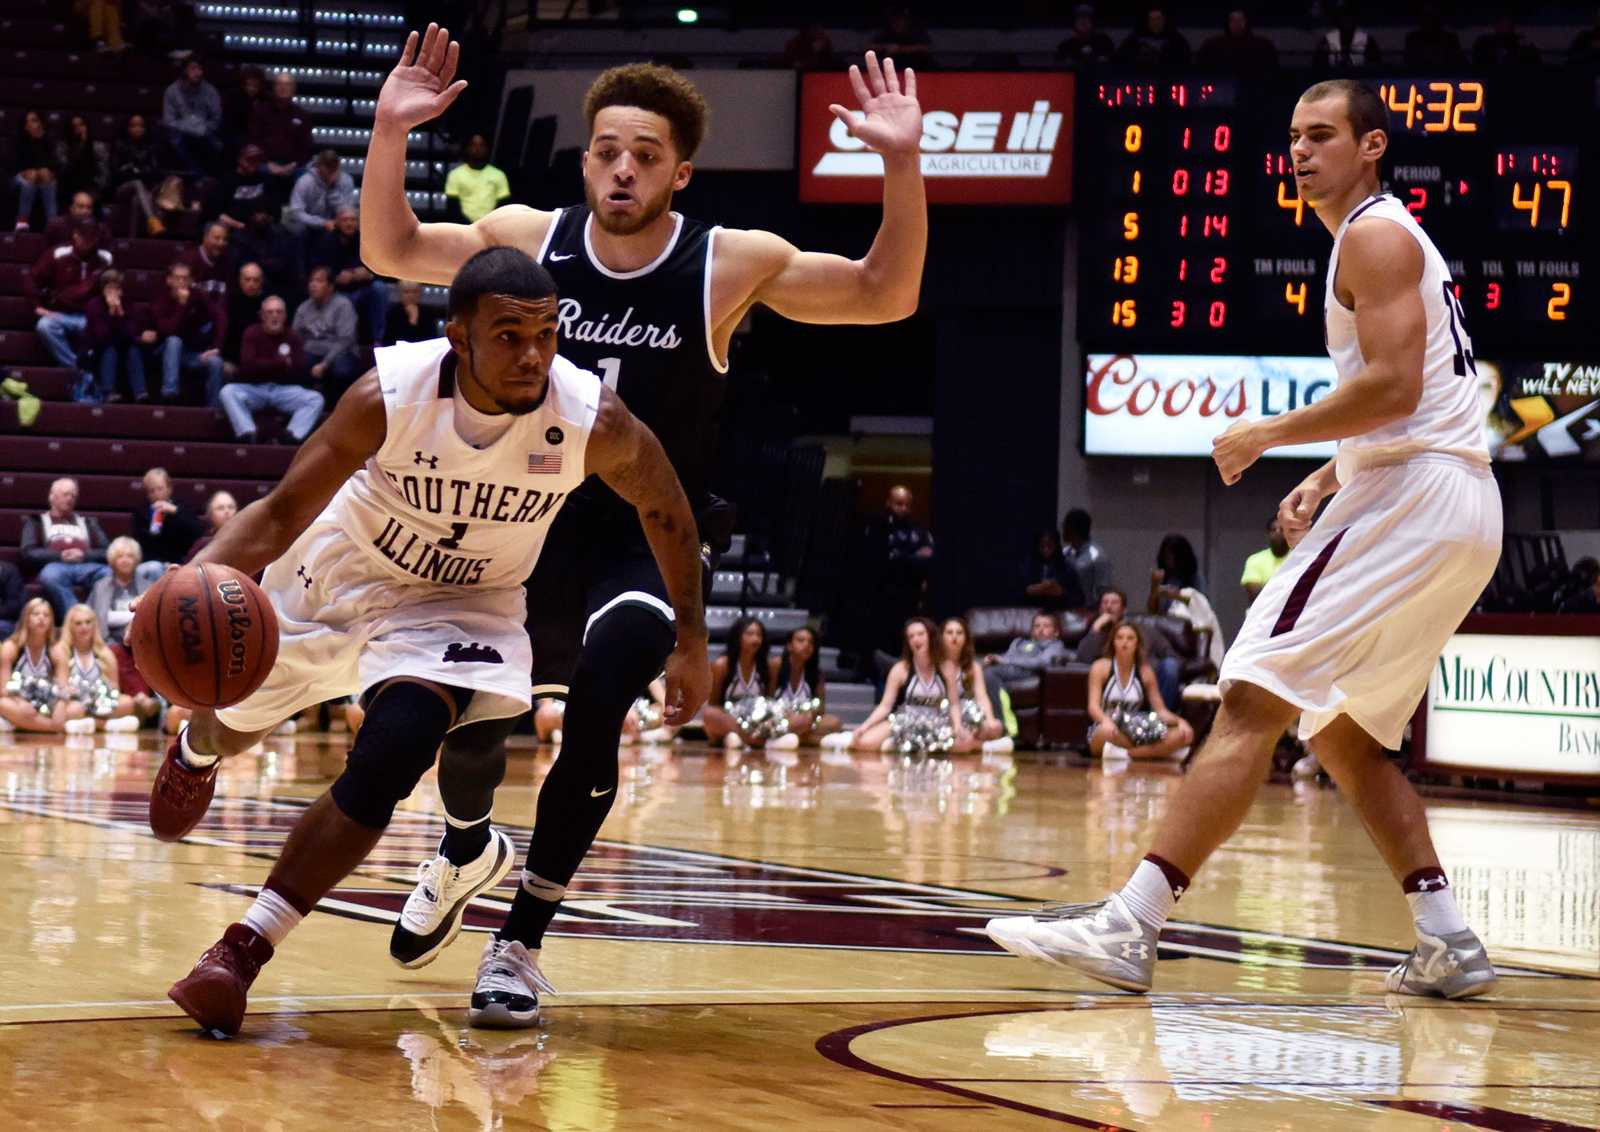 SIU senior guard Mike Rodriguez dribbles around Wright State junior guard Justin Mitchell during the Salukis' 85-81 loss to Wright State on Friday, Nov. 11, 2016, at SIU Arena. (Sean Carley | @SCarleyDE)